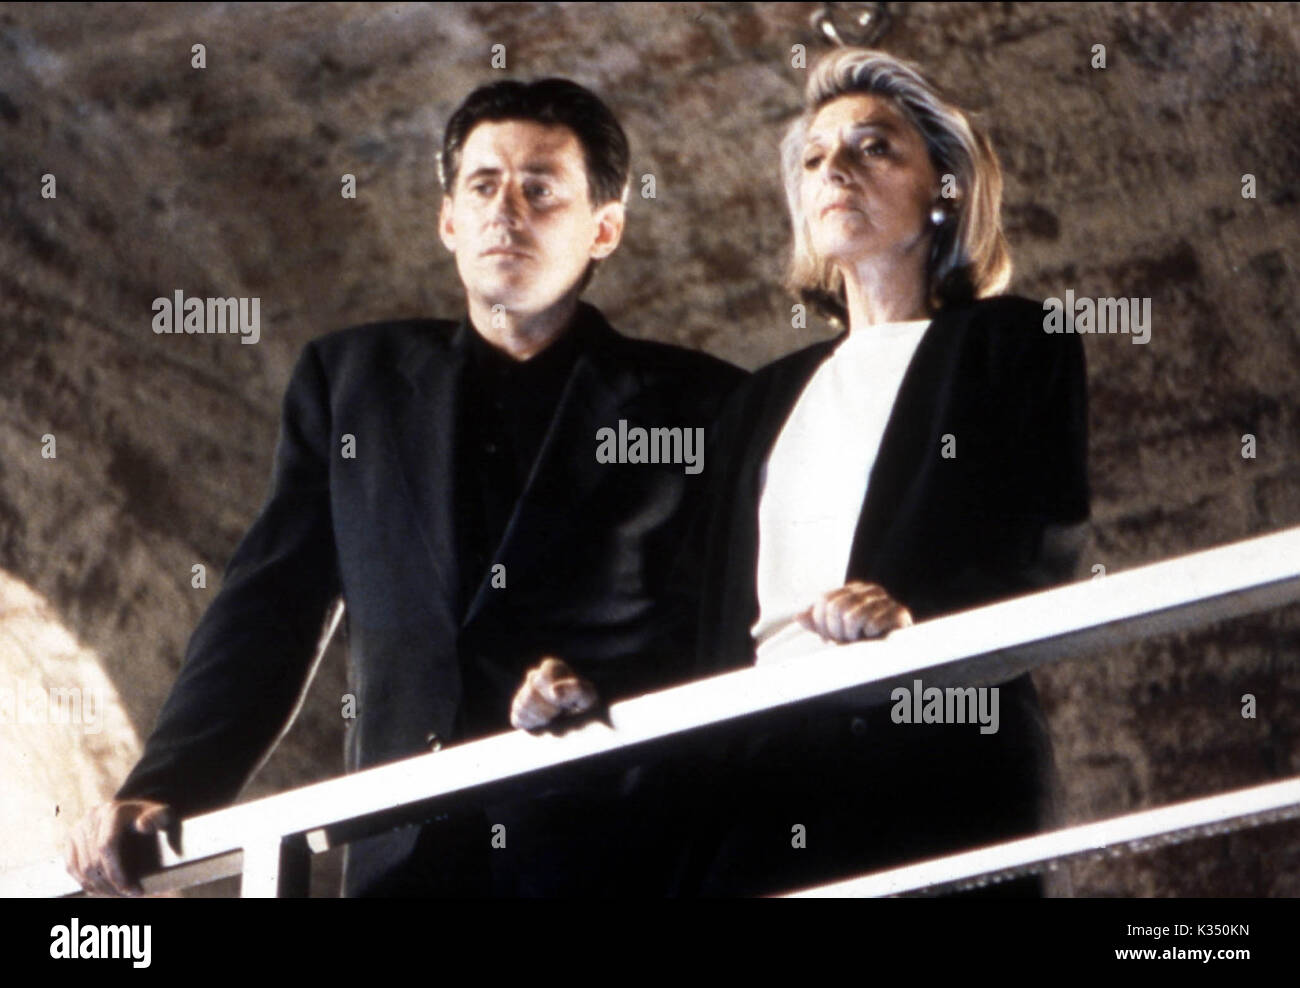 THE ASSASSIN aka THE POINT OF NO RETURN  GABRIEL BYRNE, ANNE BANCROFT     Date: 1993 Stock Photo